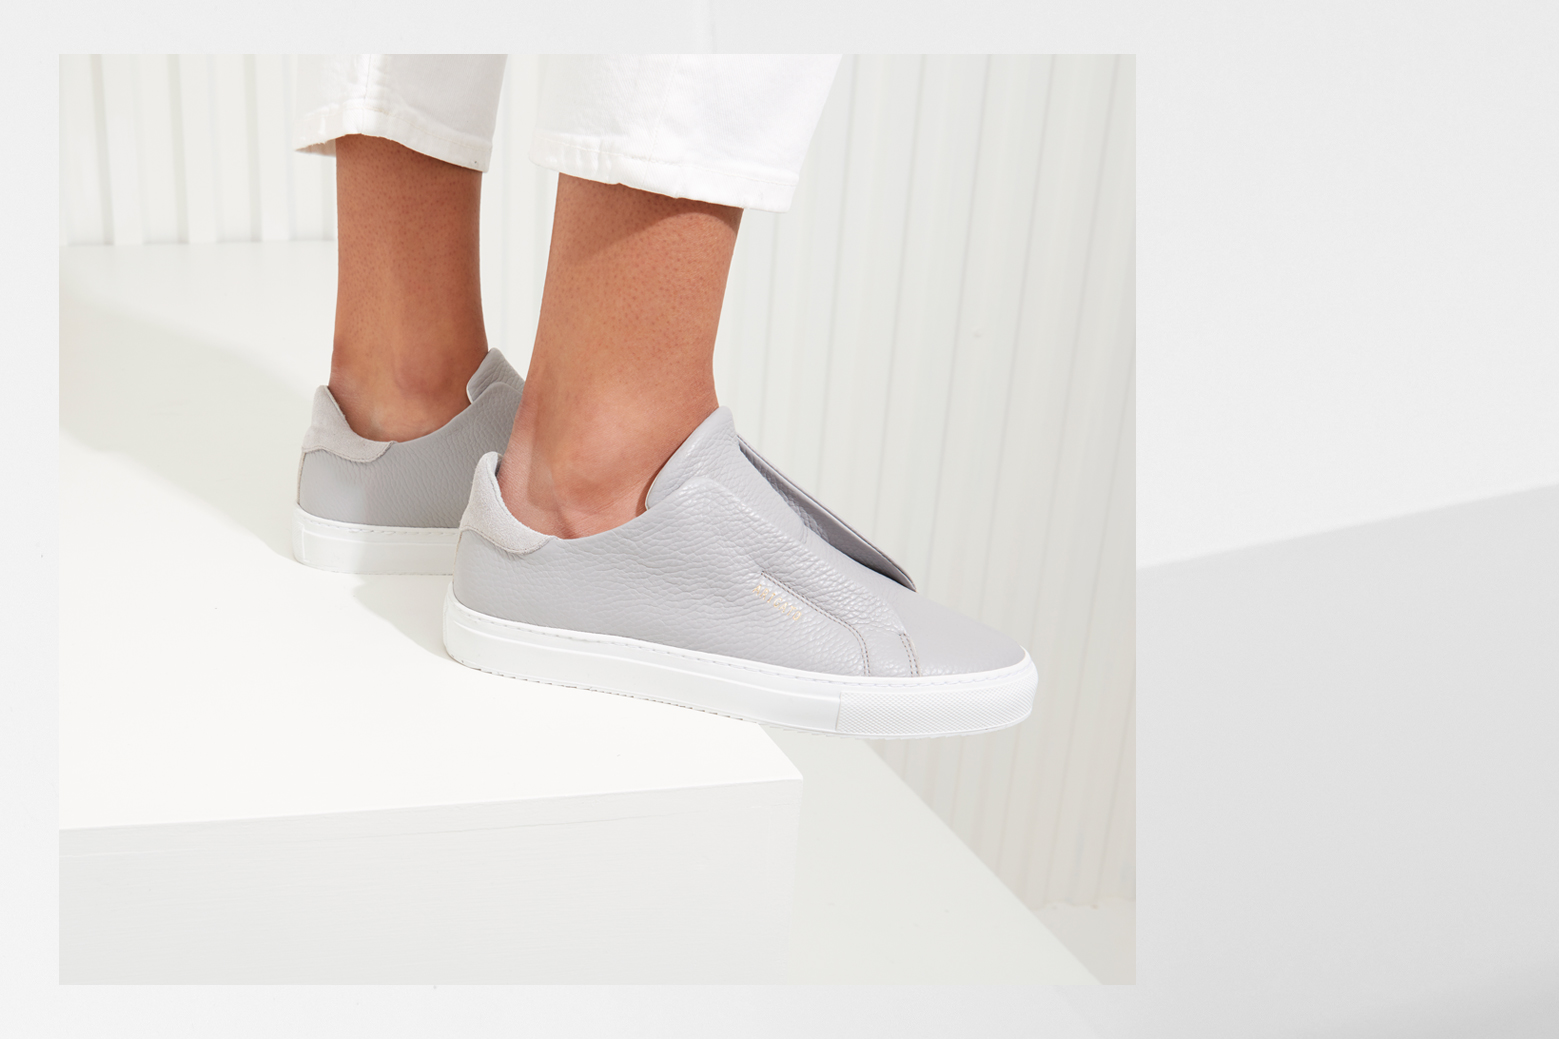 These Minimal Sneakers